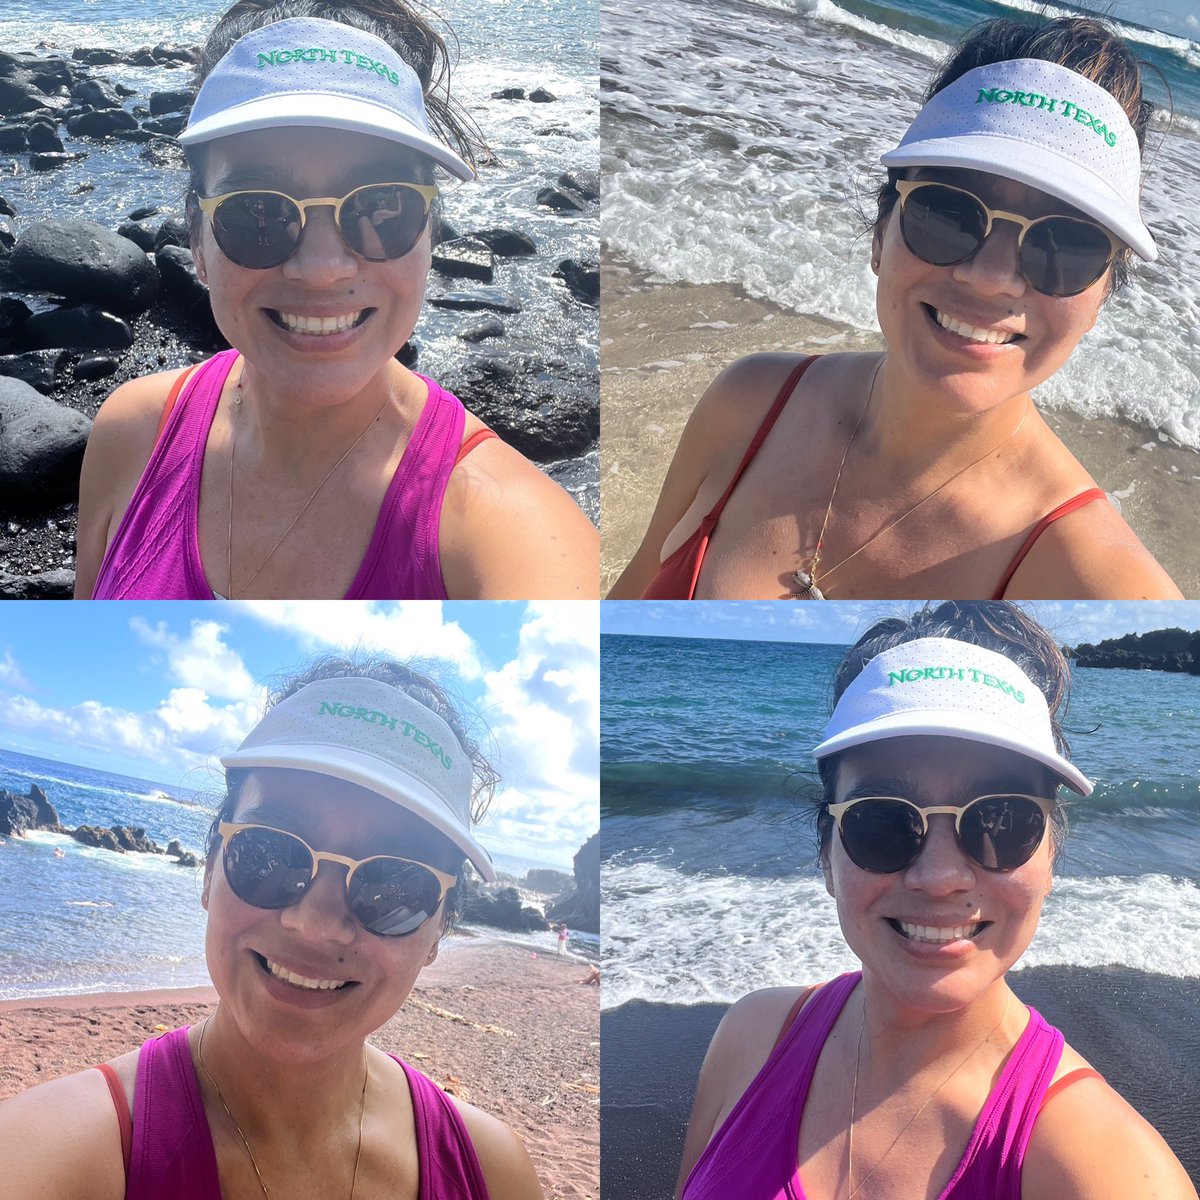 Represented #UNT on 4 different beaches in Maui! Can’t decide which color of sand was my favorite, loved them all. #GoMeanGreen #UNTAlumni